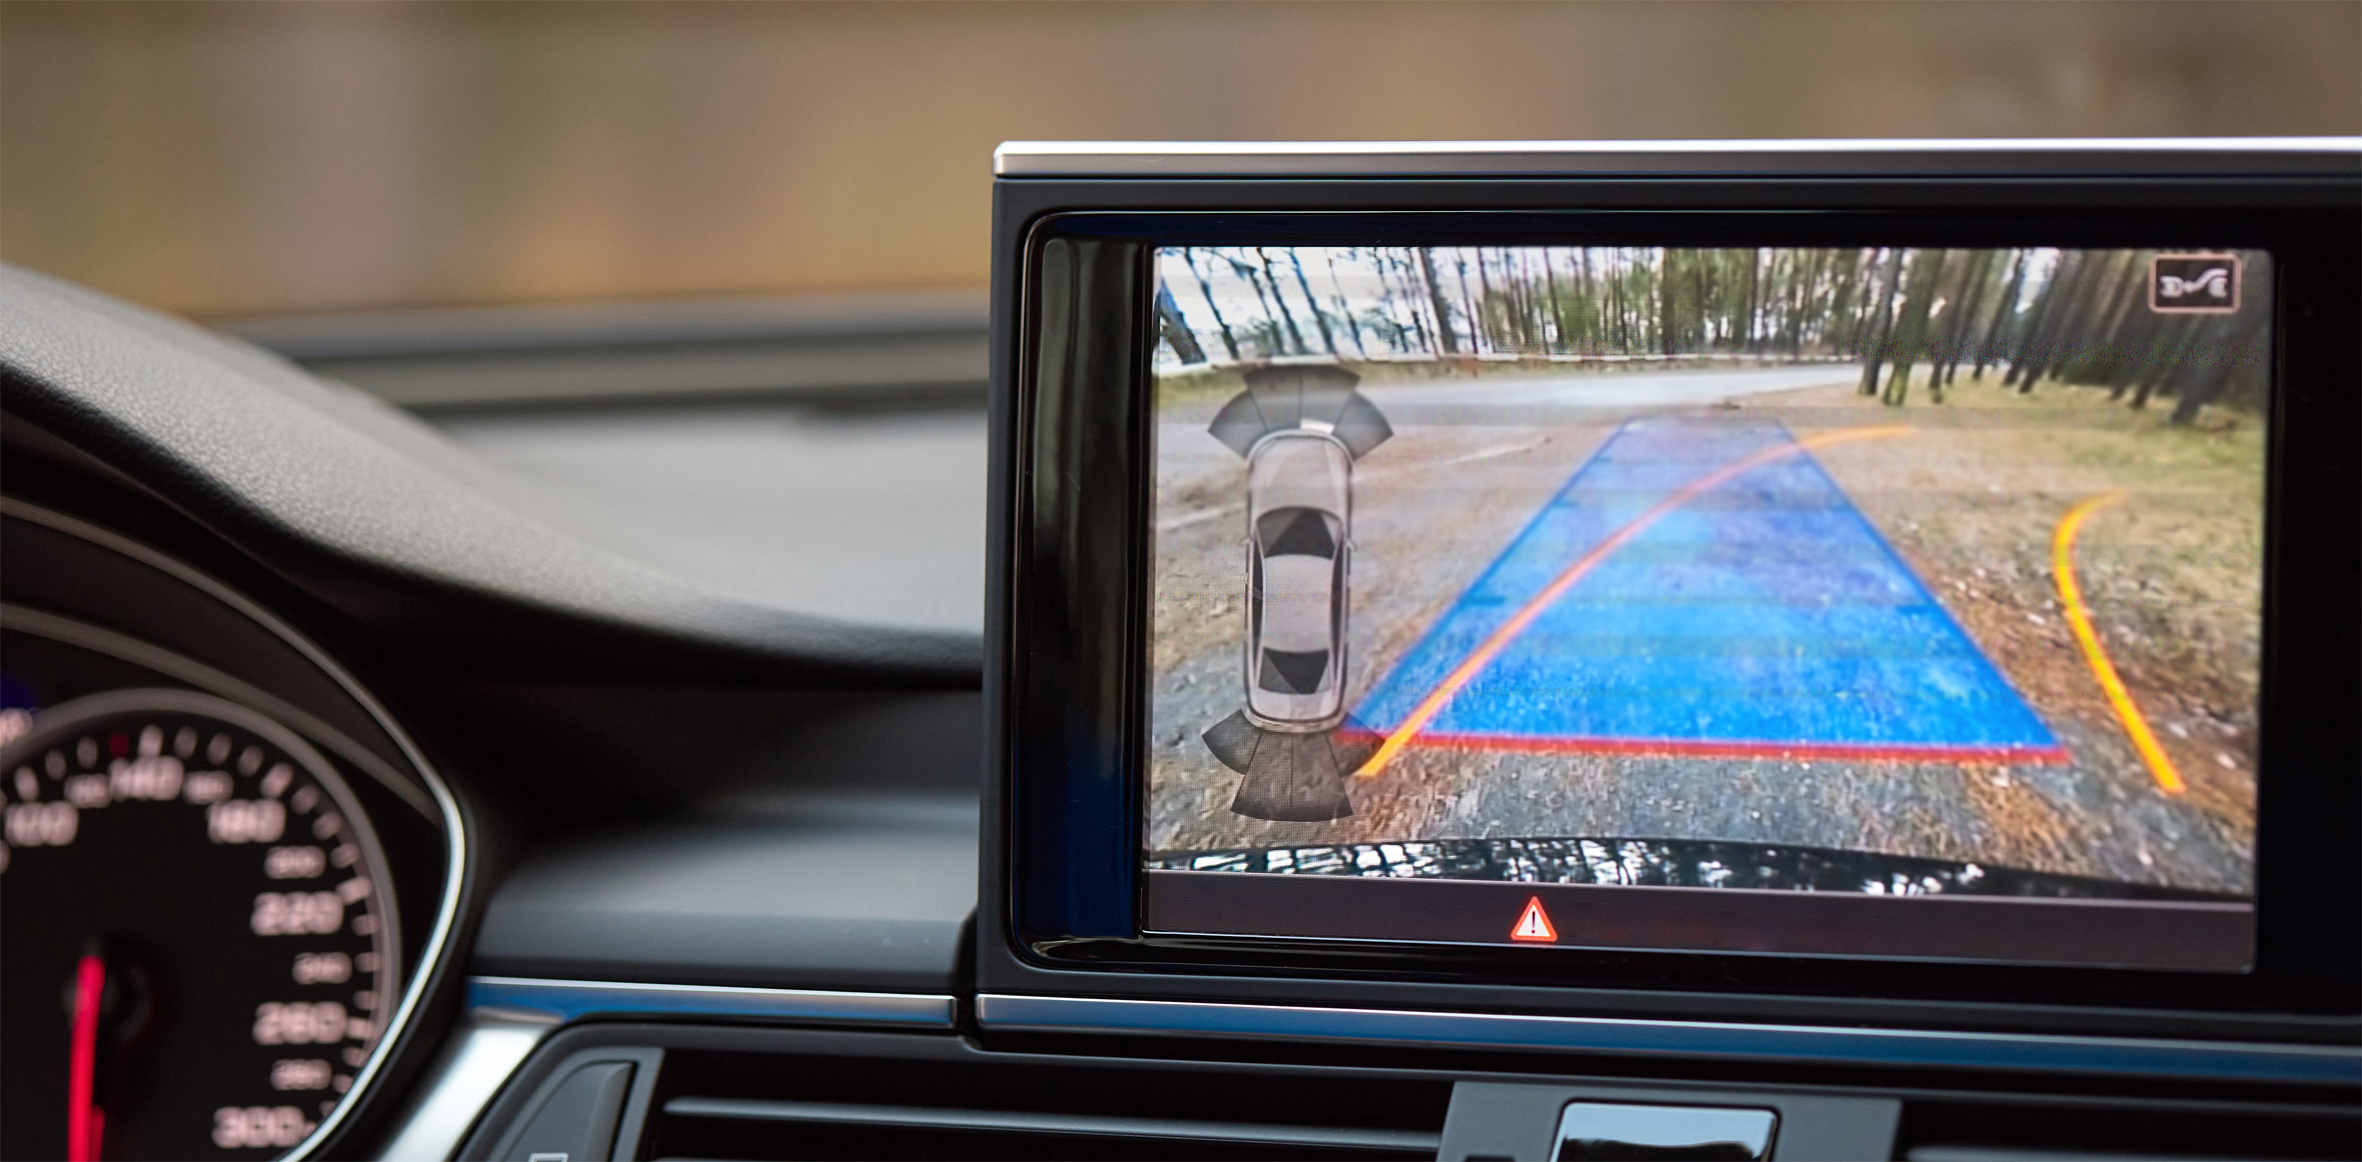 Rear view ADAS safety camera screen with interference.